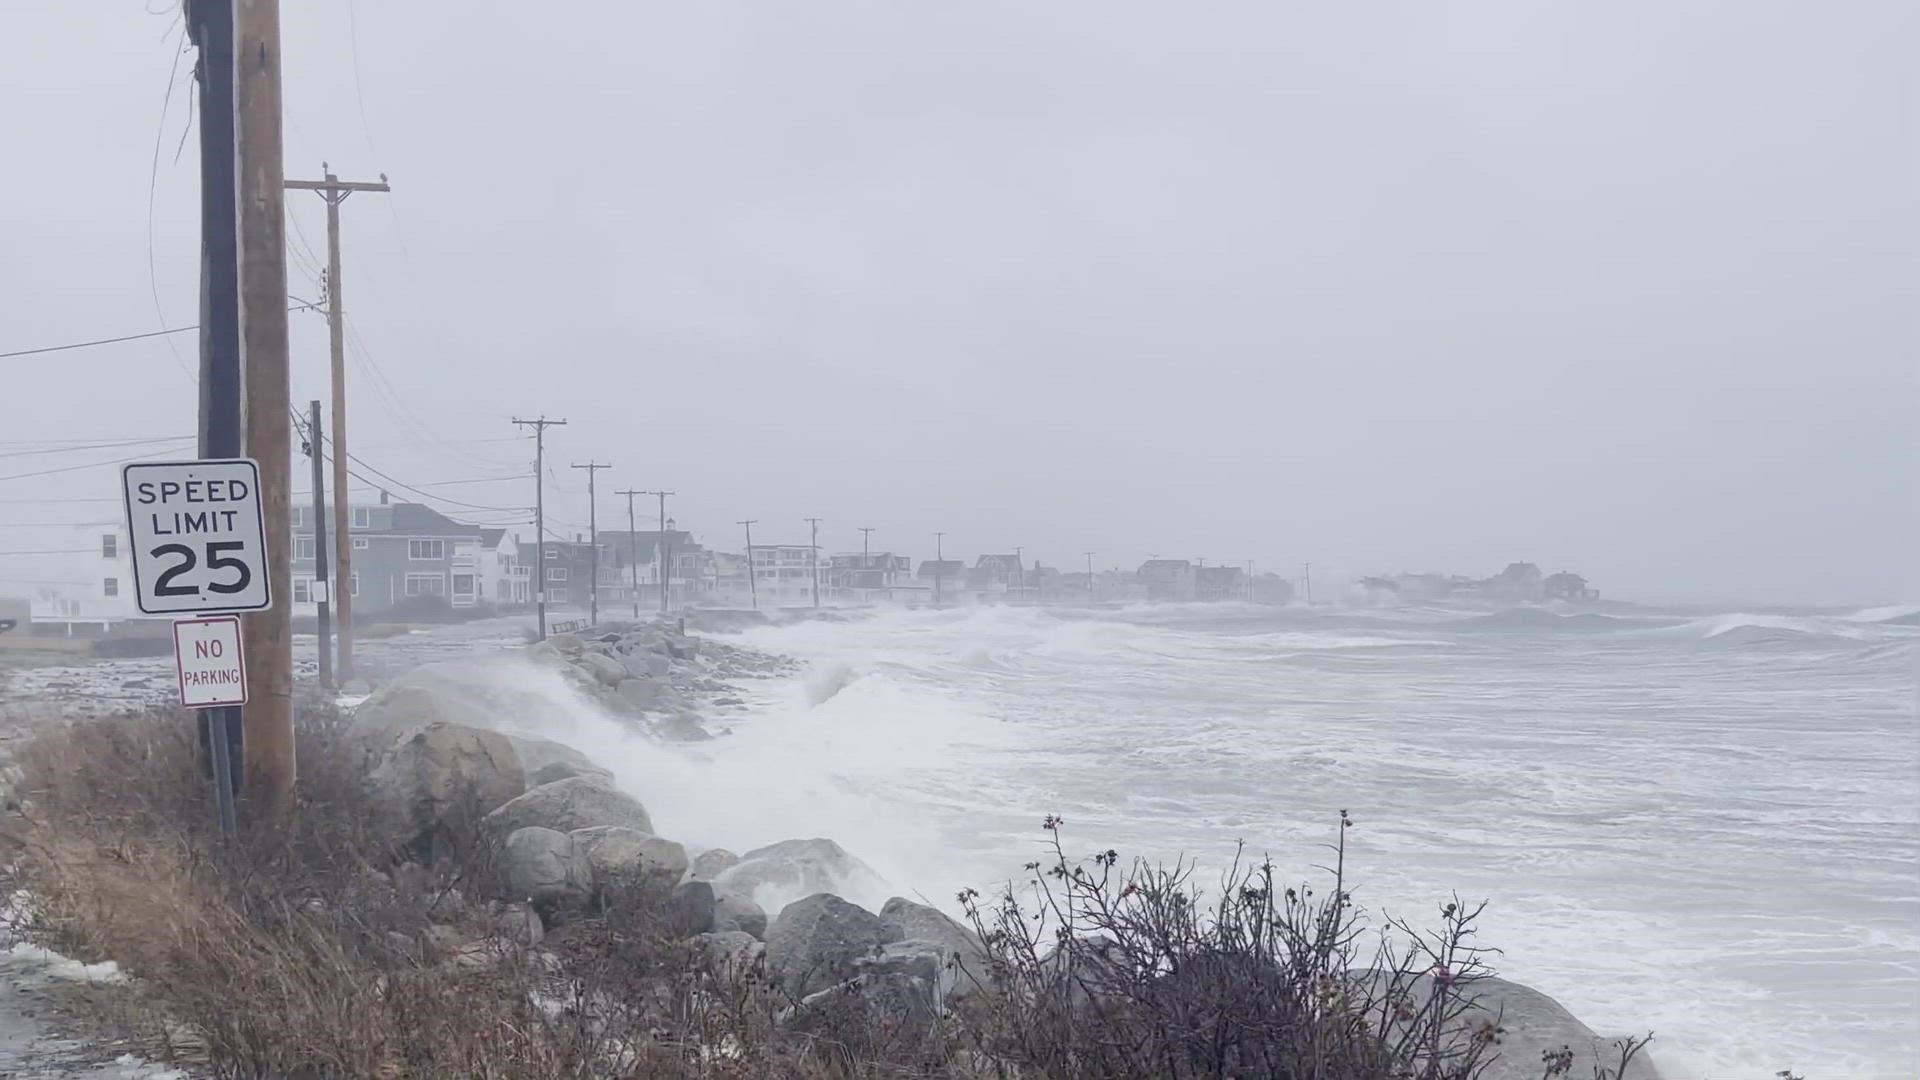 Webhannet Drive in Wells at high tide!
Credit: Dena Tufts